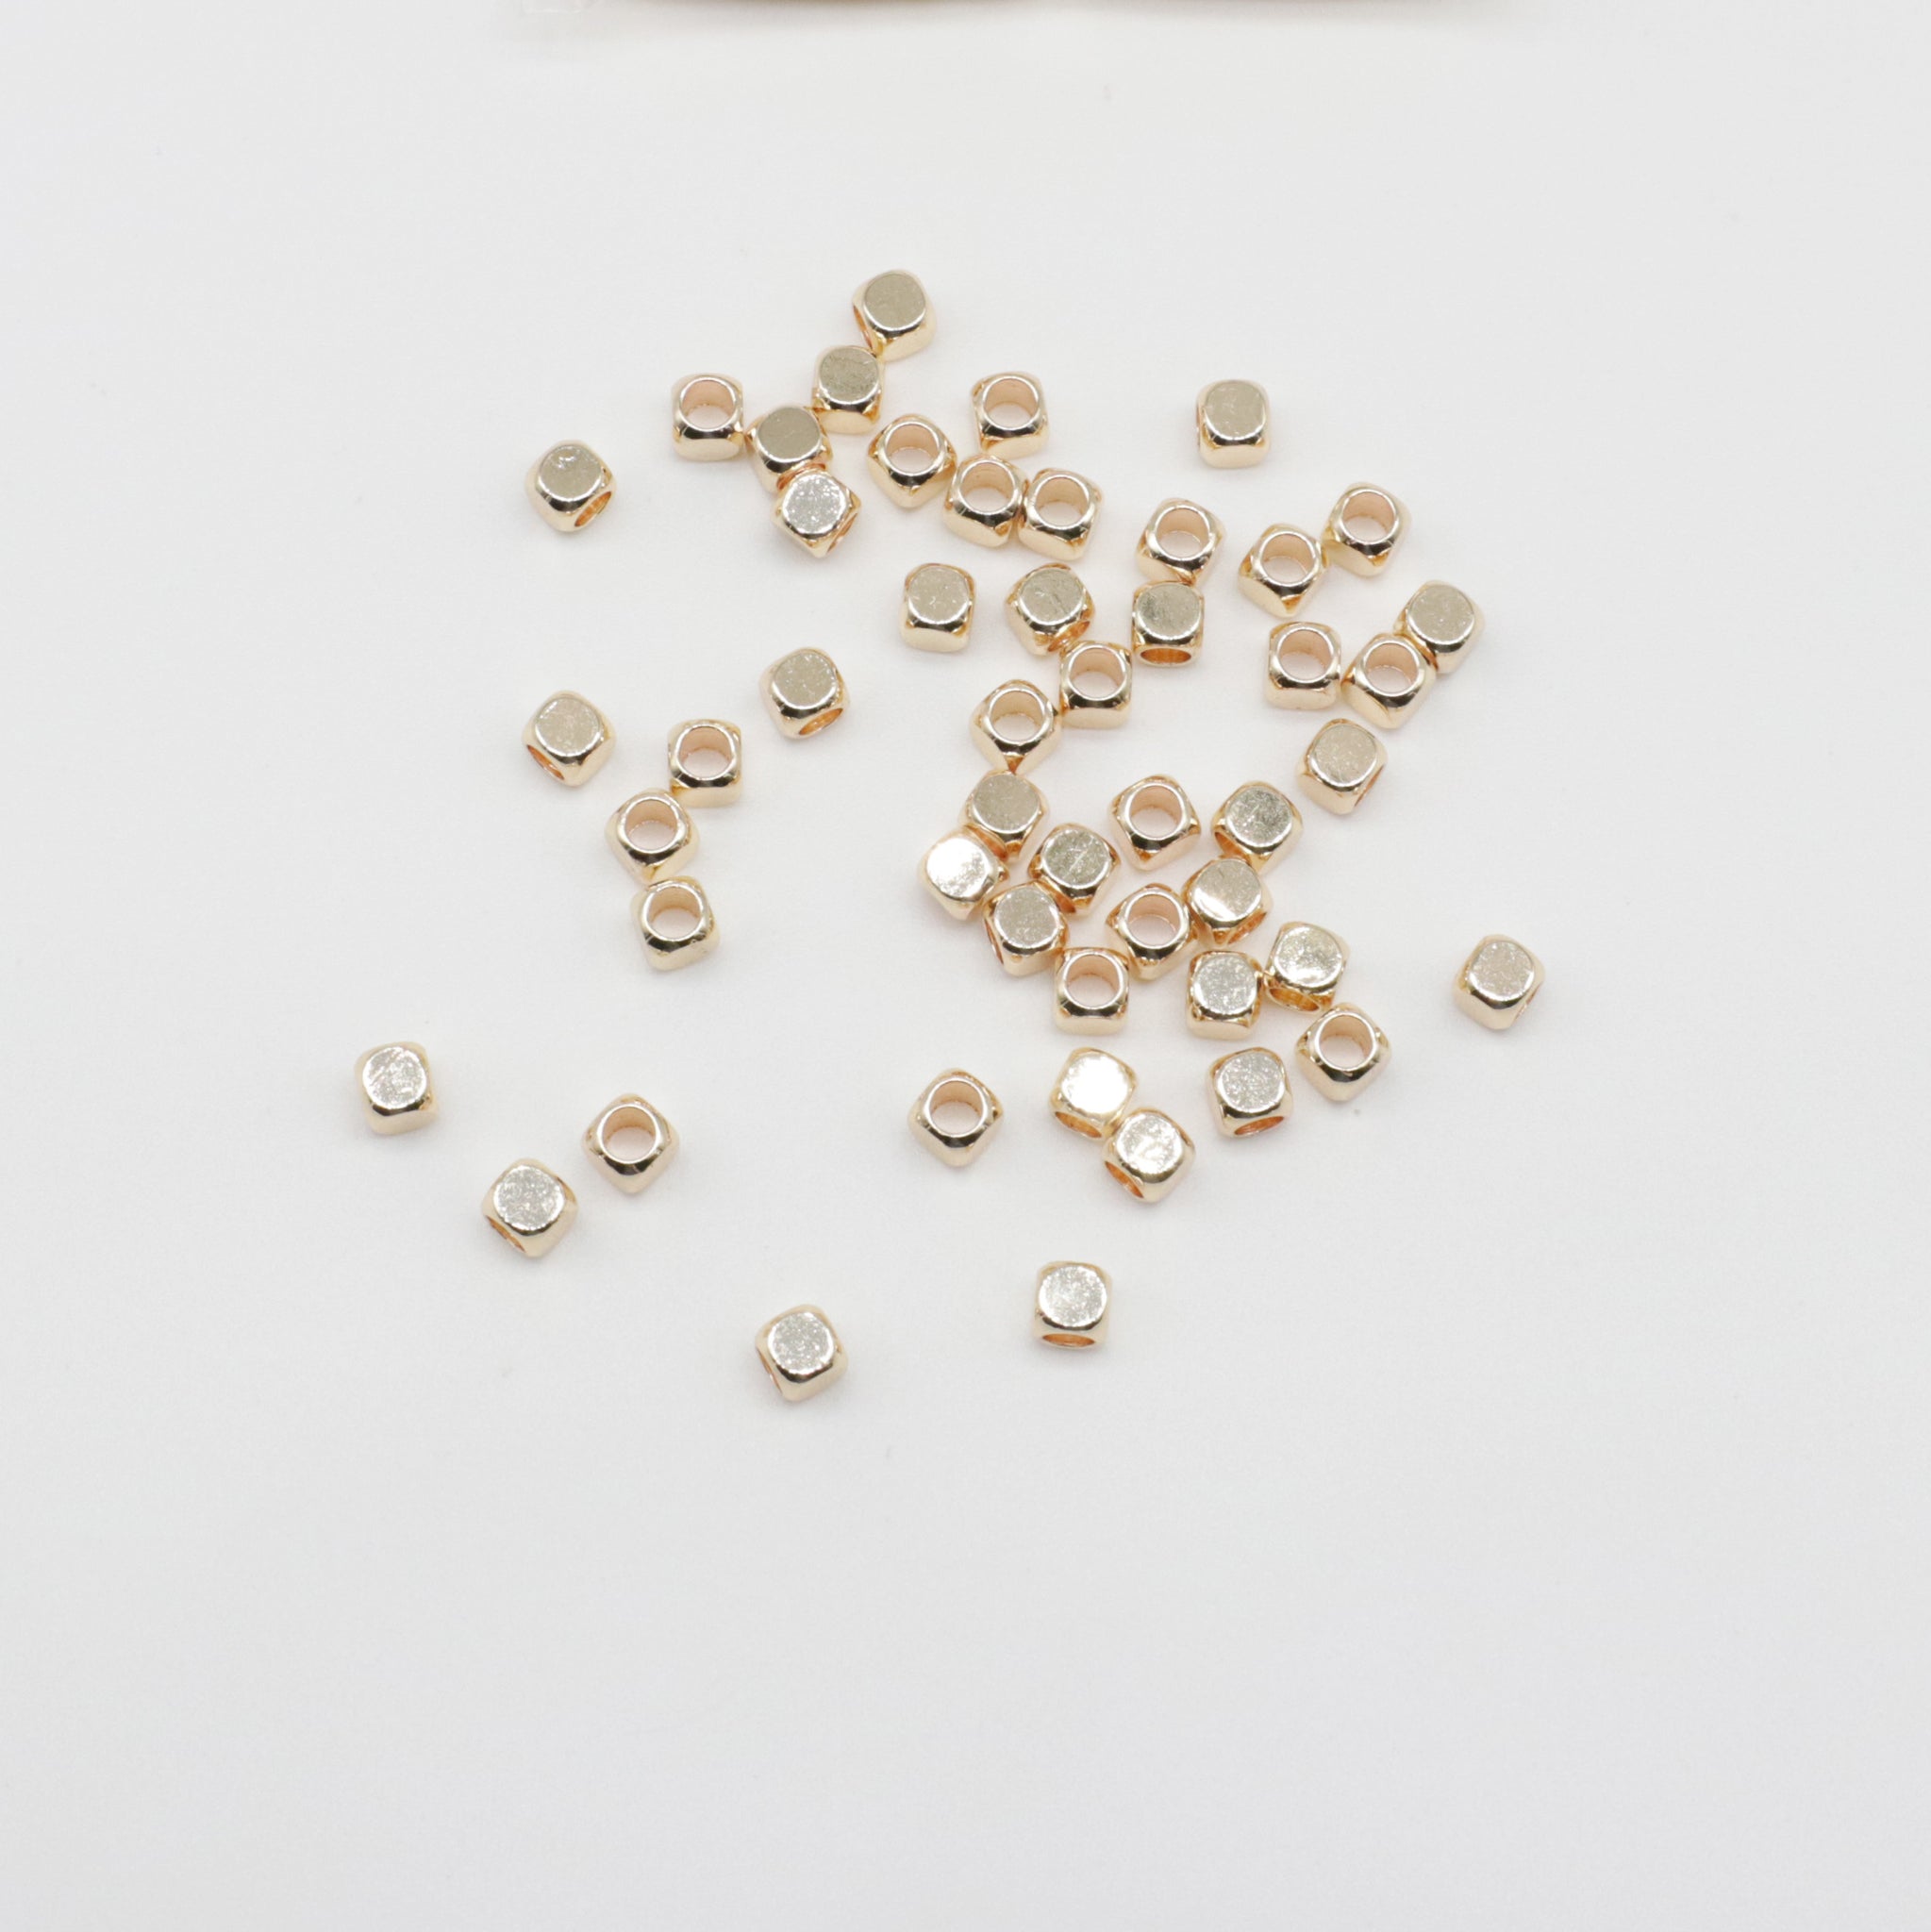 2-3-4-5 MM Round Corner Square Brass Beads With Hole Gold Plated